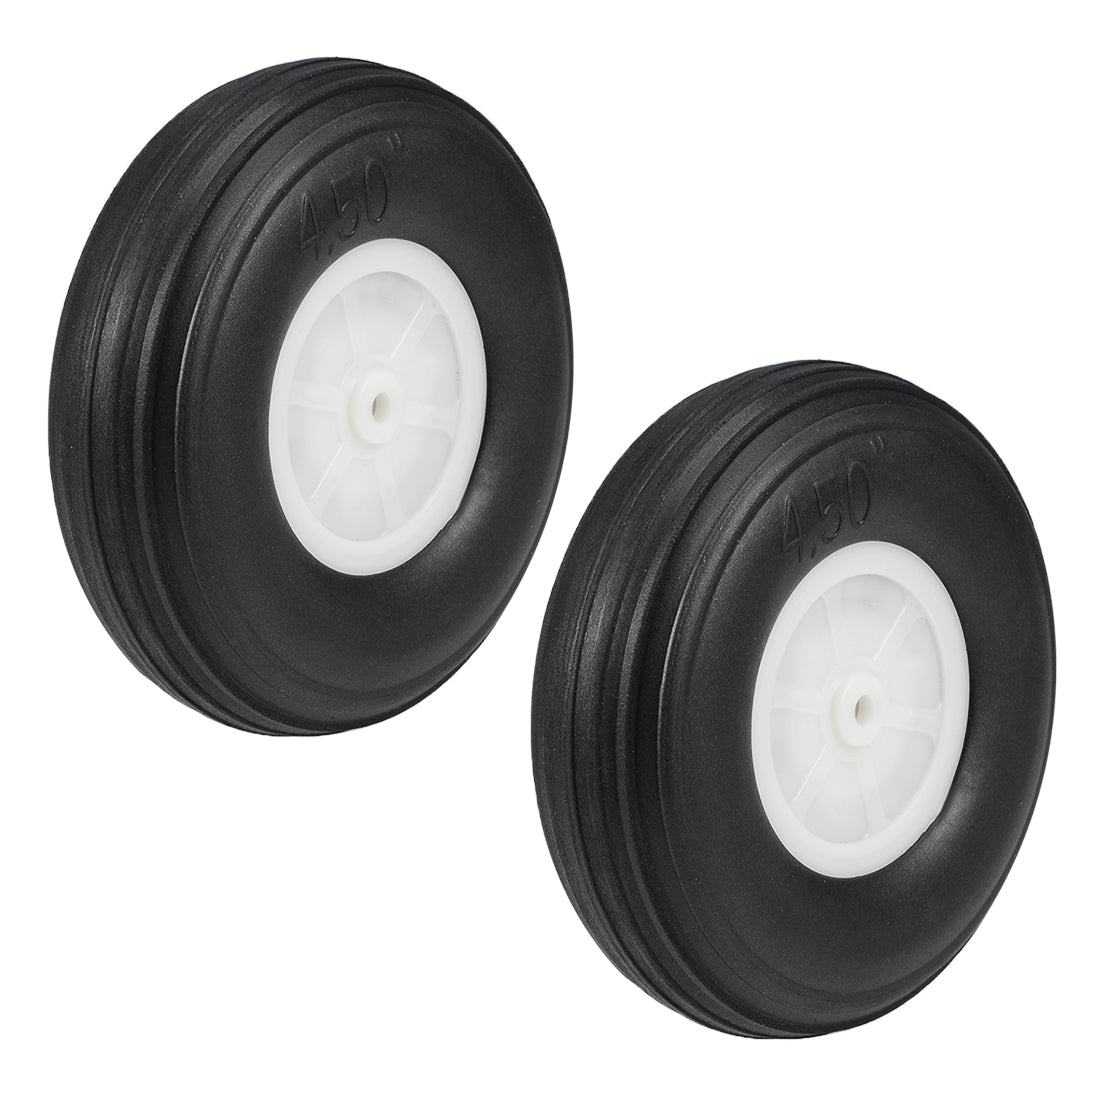 uxcell Uxcell Tire and Wheel Sets for RC Airplane,PU Sponge Tire with Plastic Hub,4.5" 2pcs